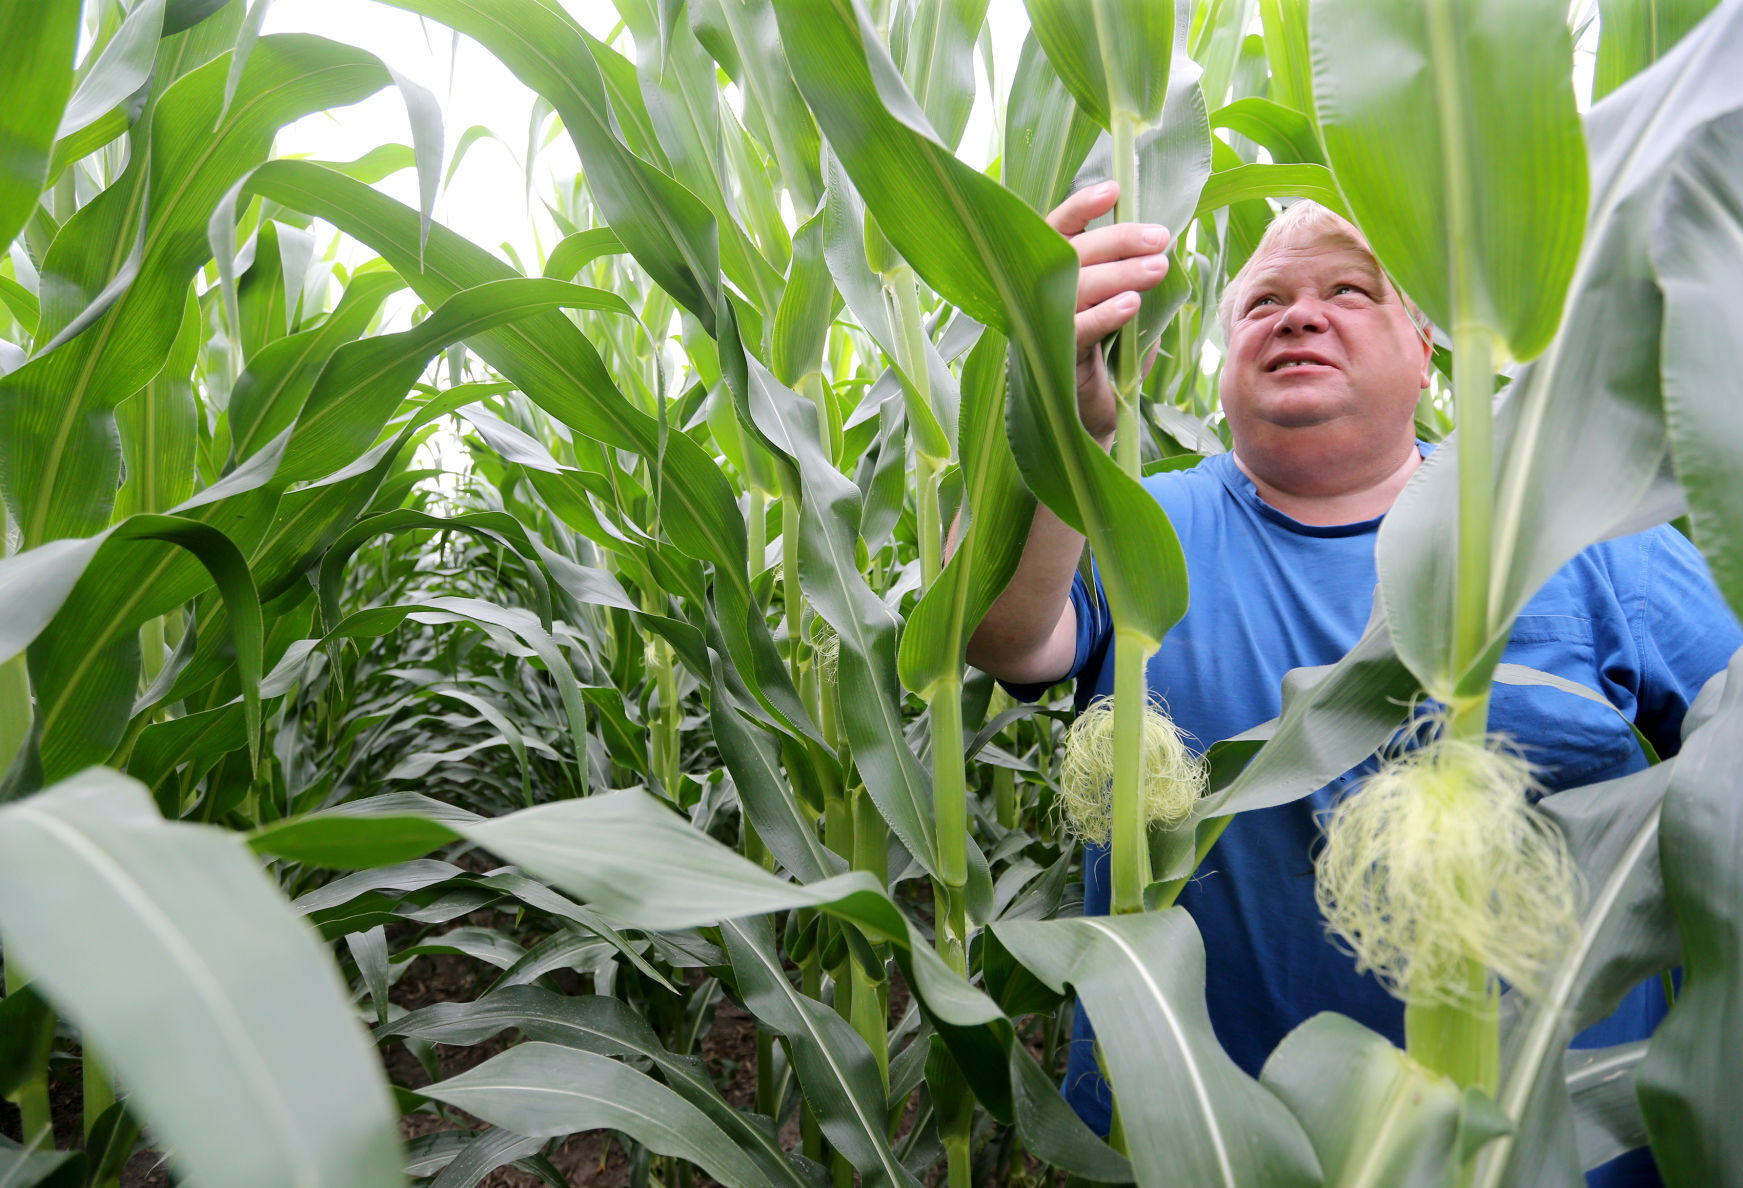 Jeff Pape inspects cornstalks for insects and disease at his farm in rural Dyersville, Iowa. PHOTO CREDIT: JESSICA REILLY